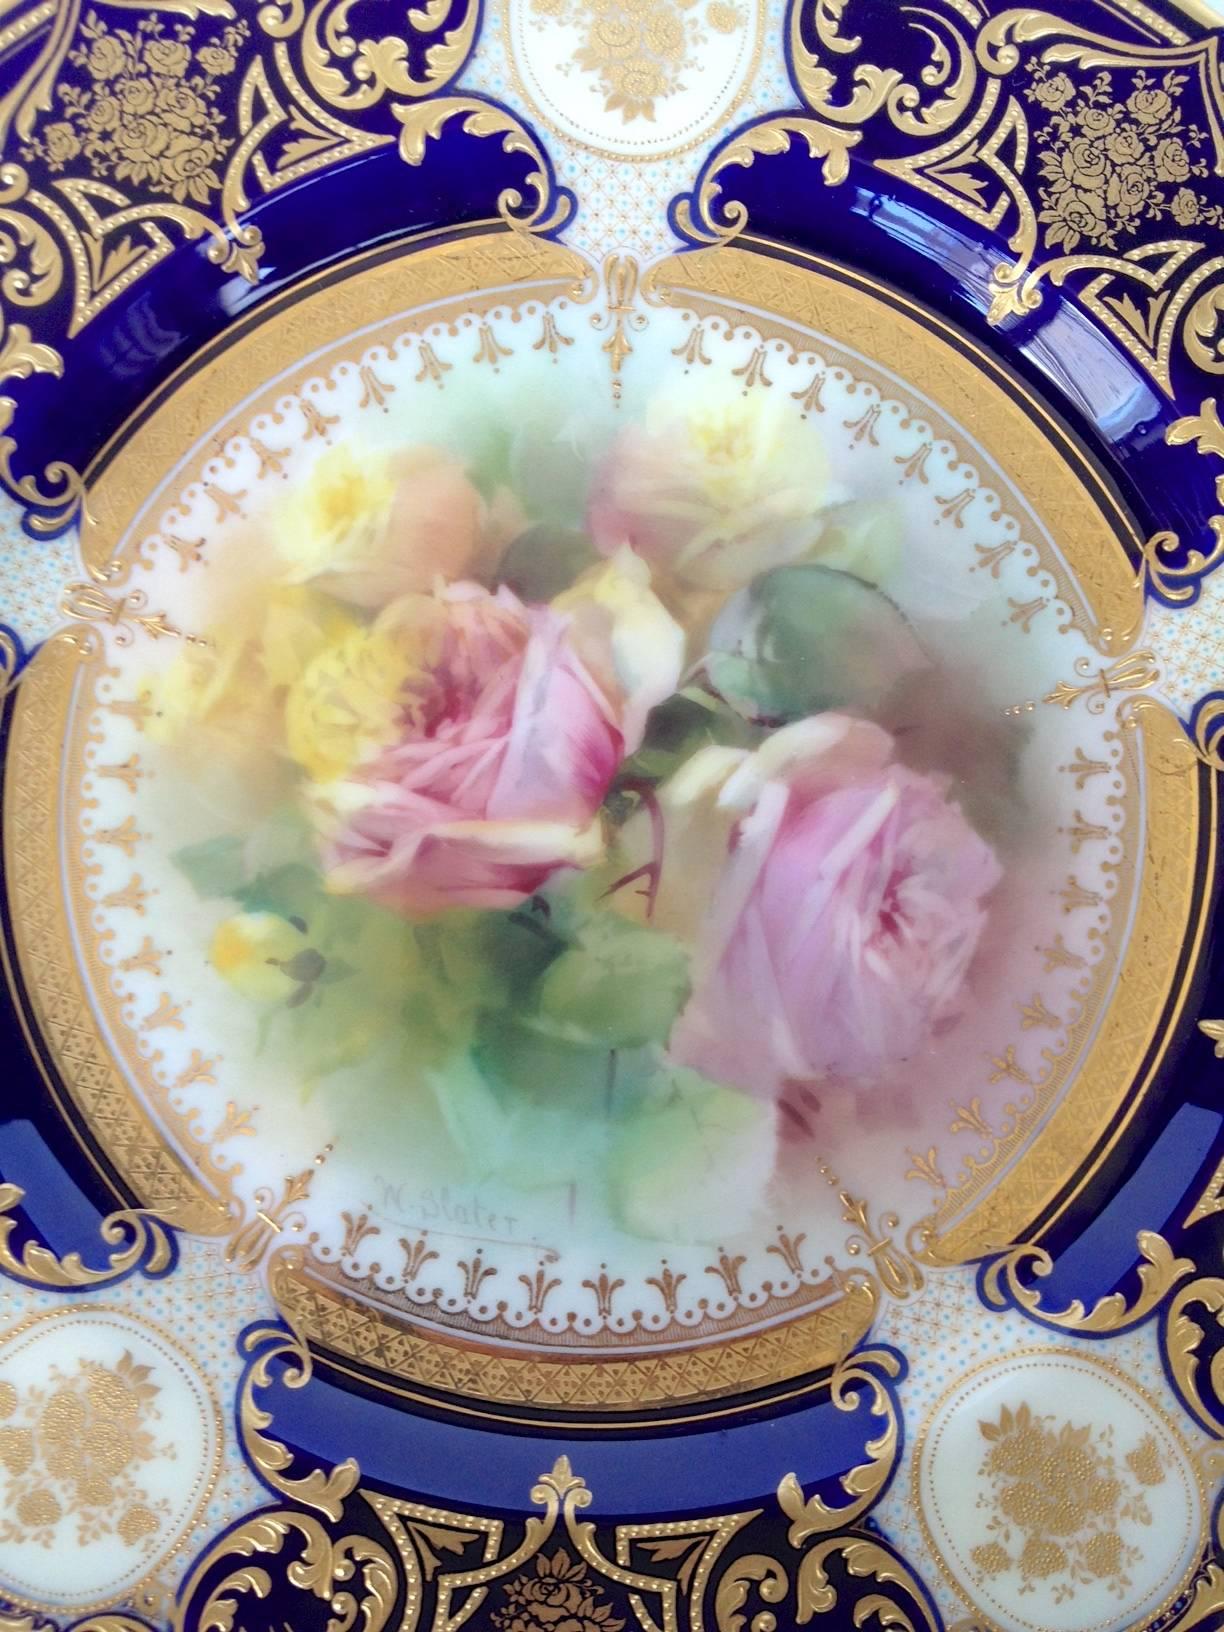 Antique Royal Doulton Rose Plates Signed W. Slater, circa 1920s, Hand-Painted In Excellent Condition For Sale In Redding, CA